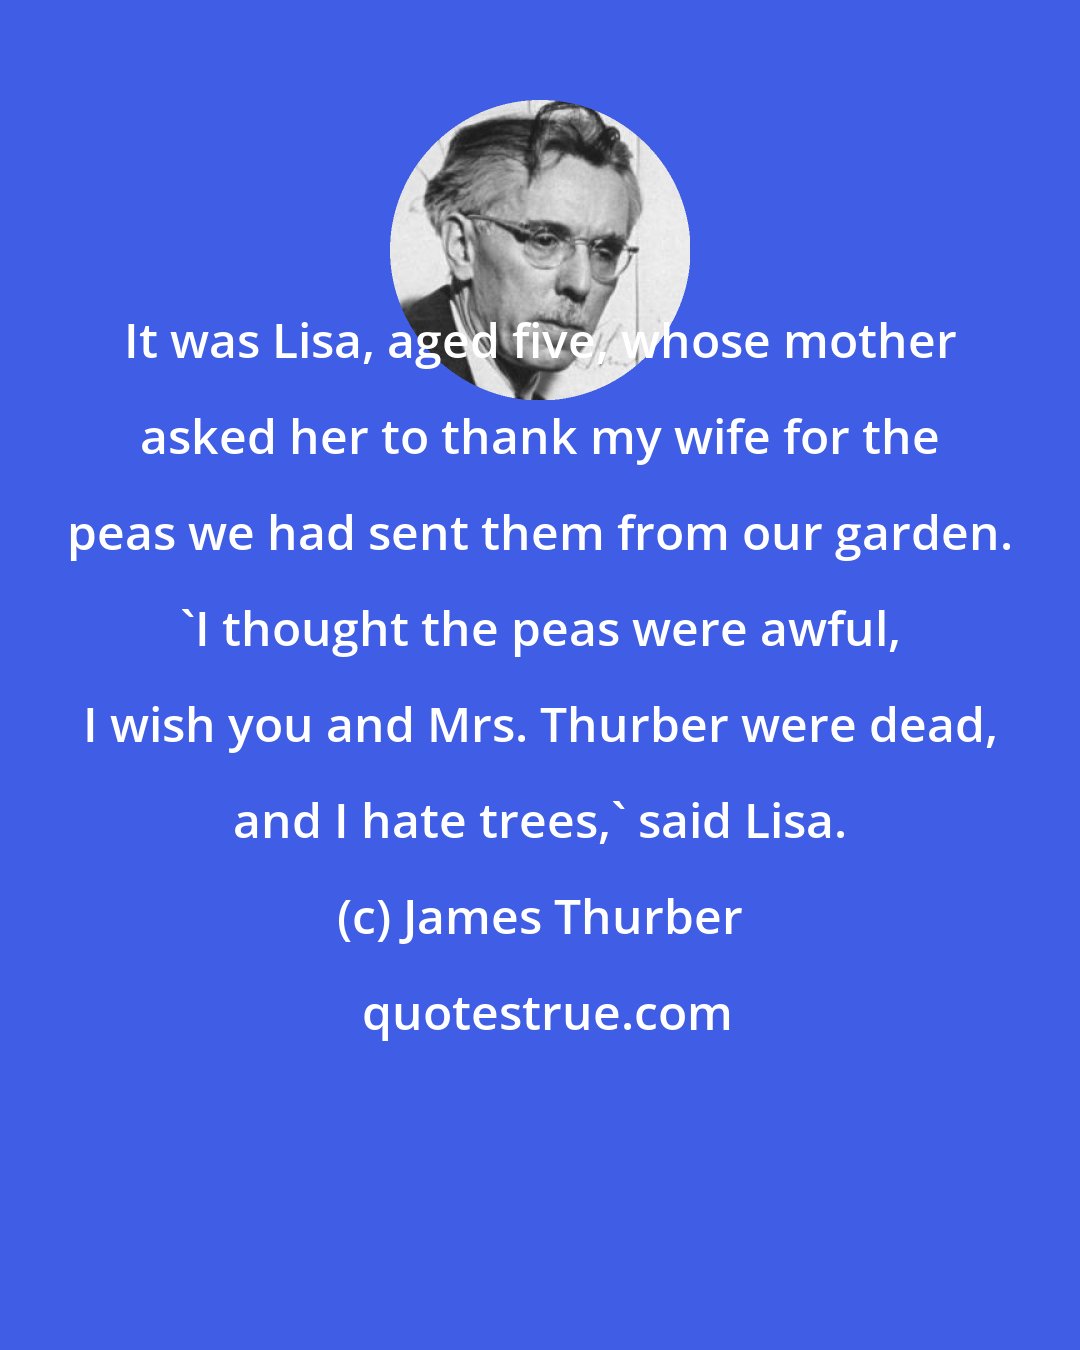 James Thurber: It was Lisa, aged five, whose mother asked her to thank my wife for the peas we had sent them from our garden. 'I thought the peas were awful, I wish you and Mrs. Thurber were dead, and I hate trees,' said Lisa.